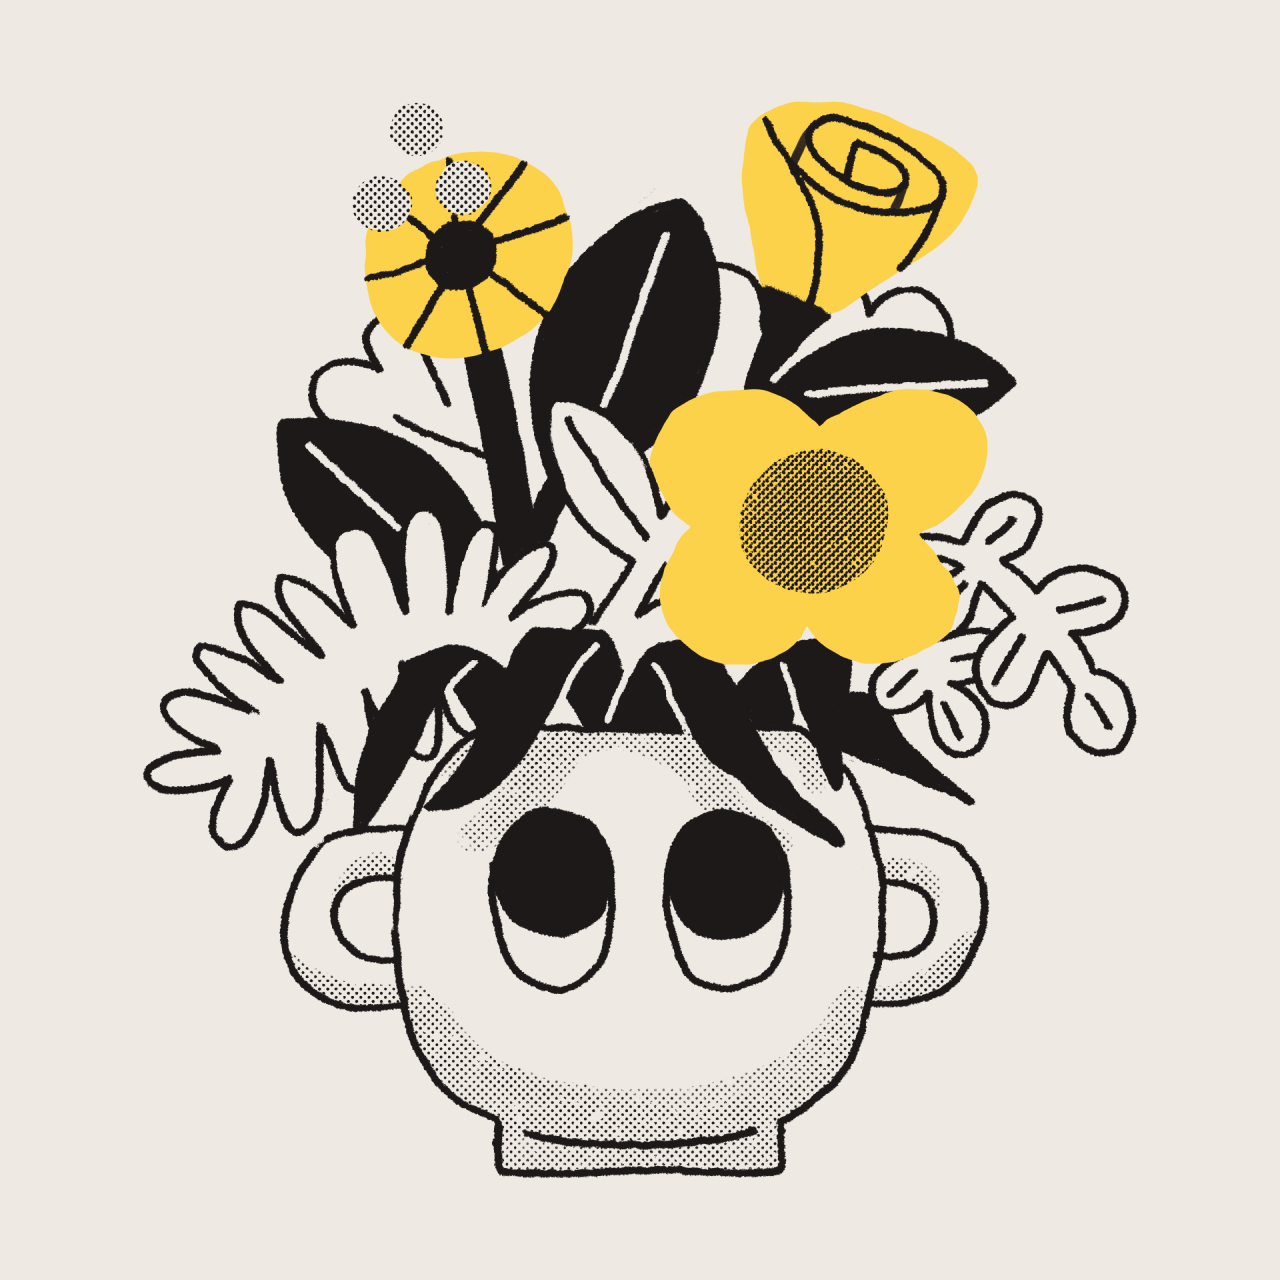 An illustration of flowers in a round vase with cartoon eyeballs.